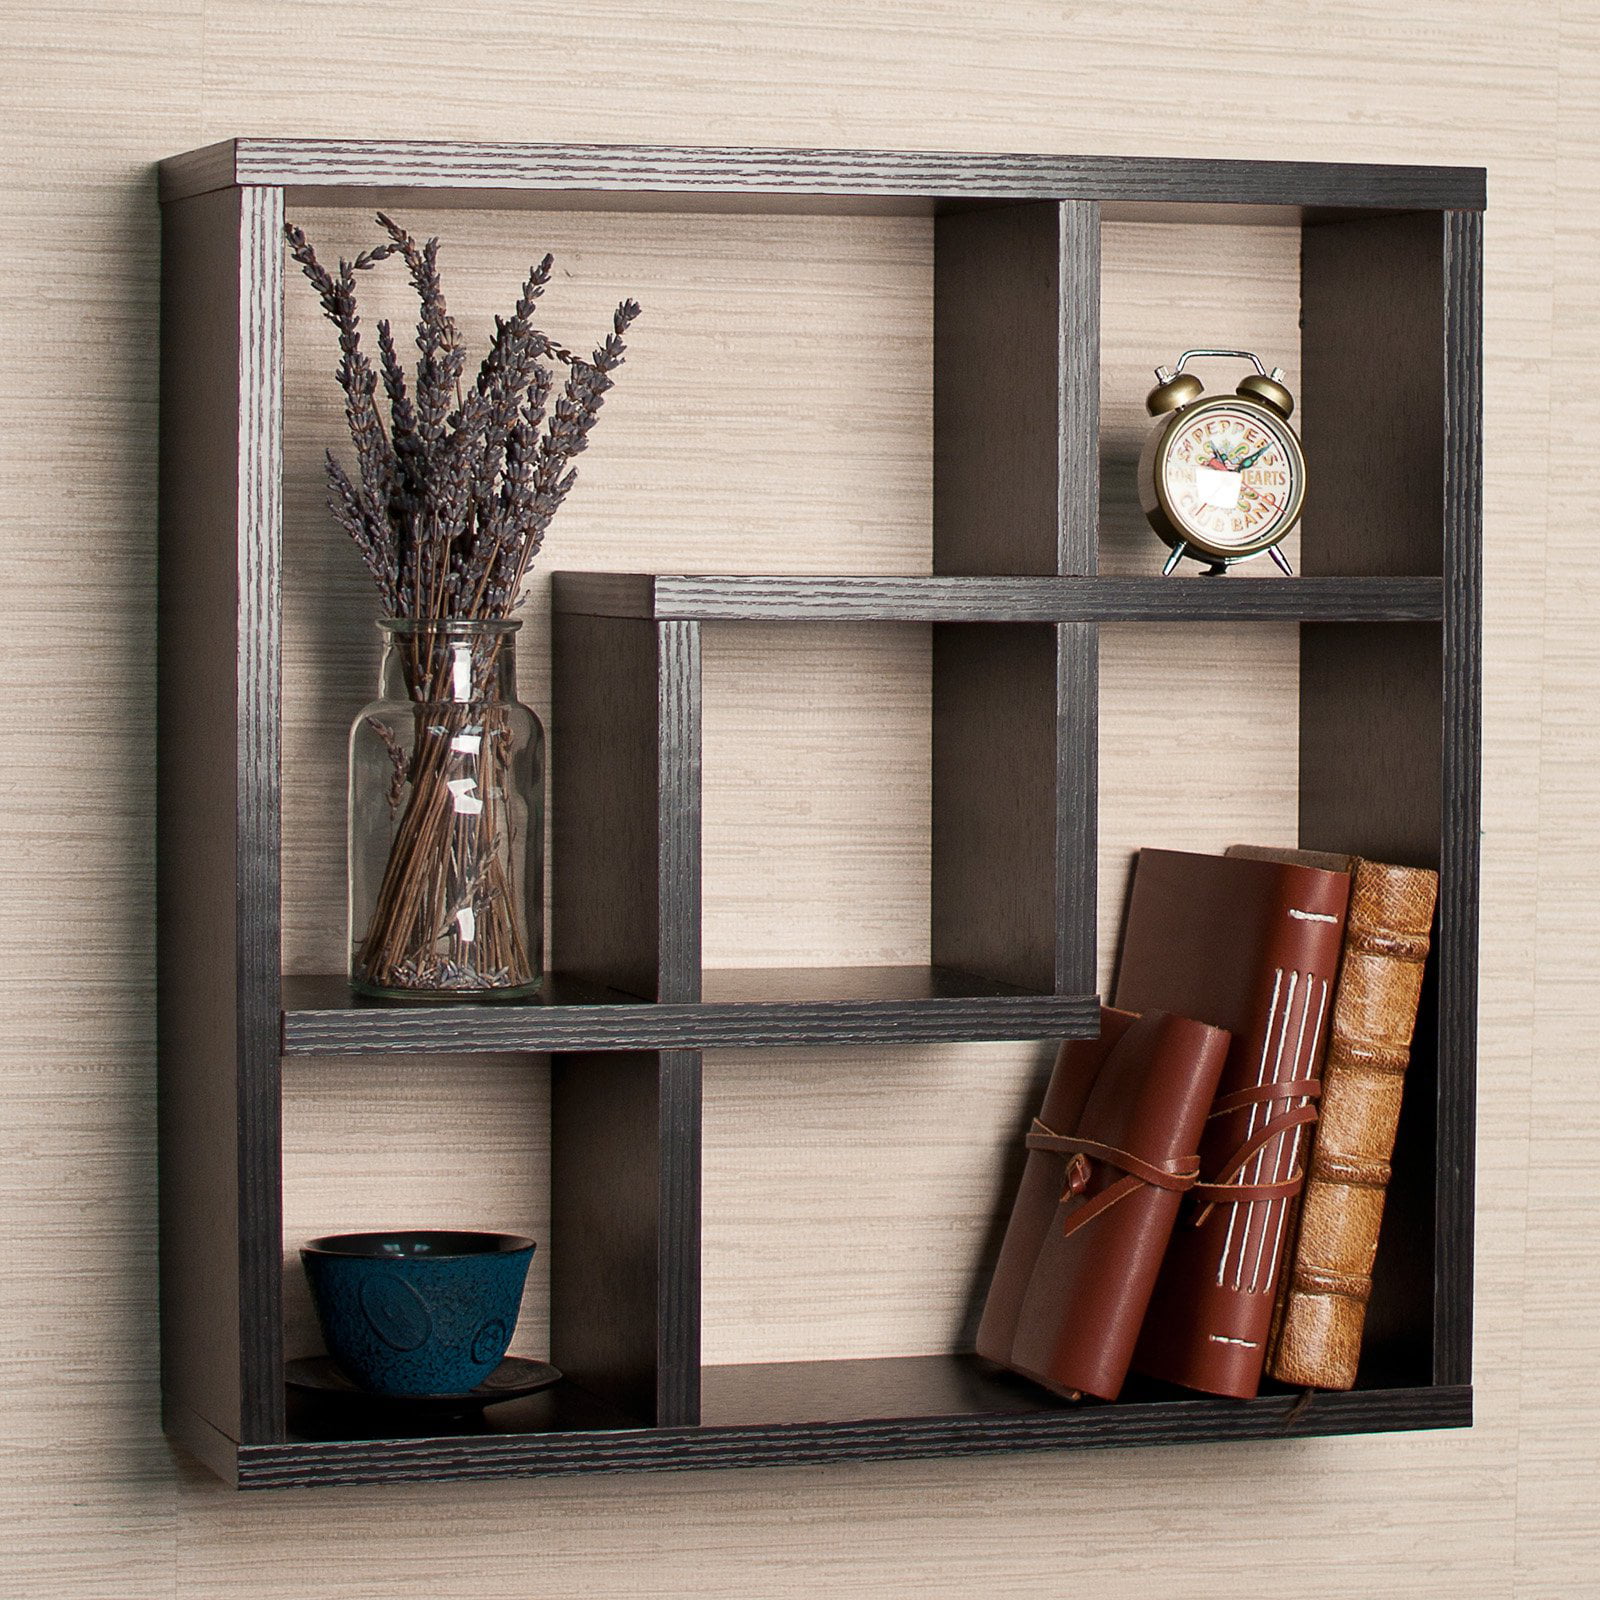 Wall-Mounted Box Shelves – A Trendy Variation On Open Shelves